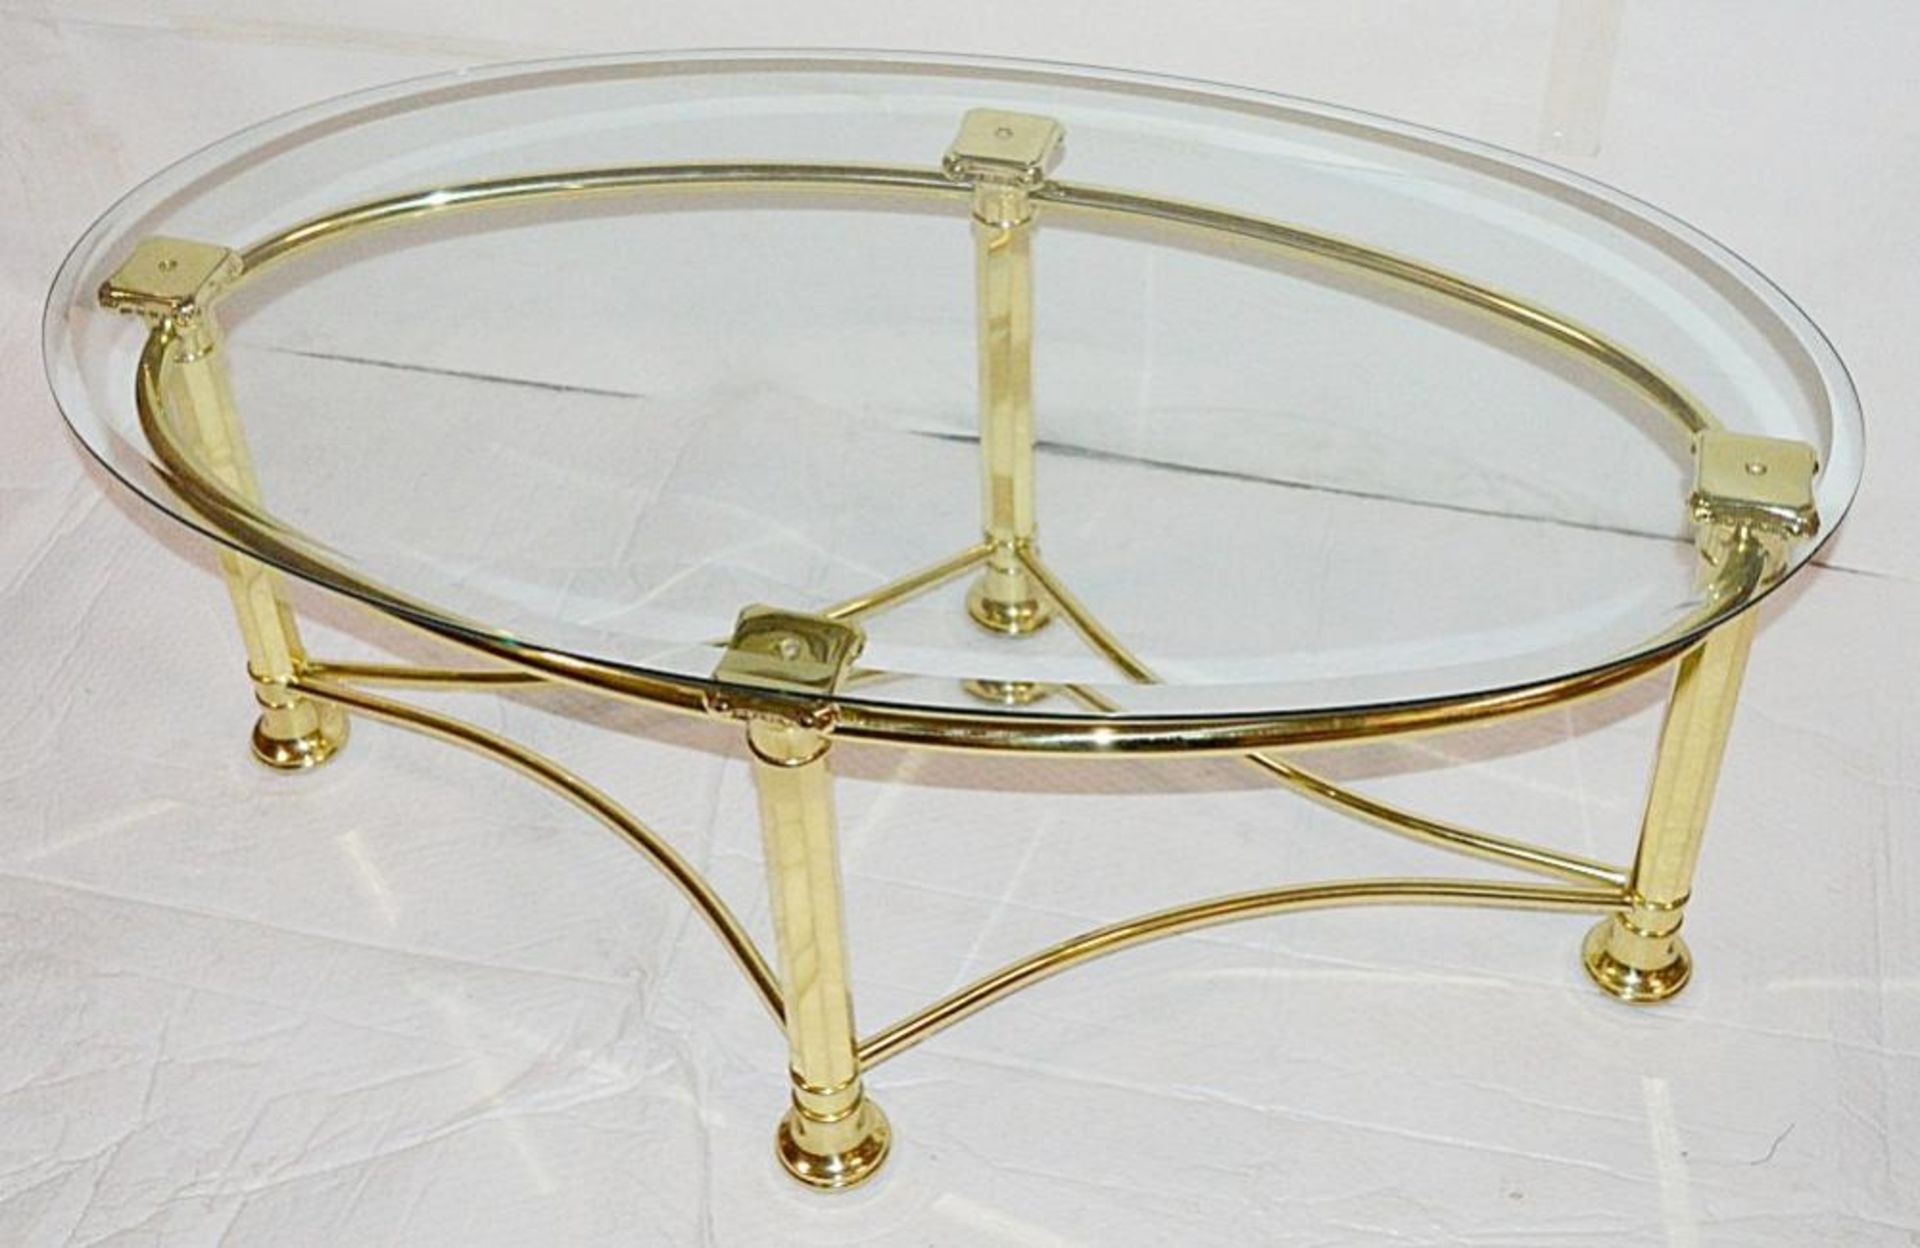 1 x Chelsom “Roman” Polished Brass Oblong Coffee Table - Ex-Display **£1 Start, No Reserve**